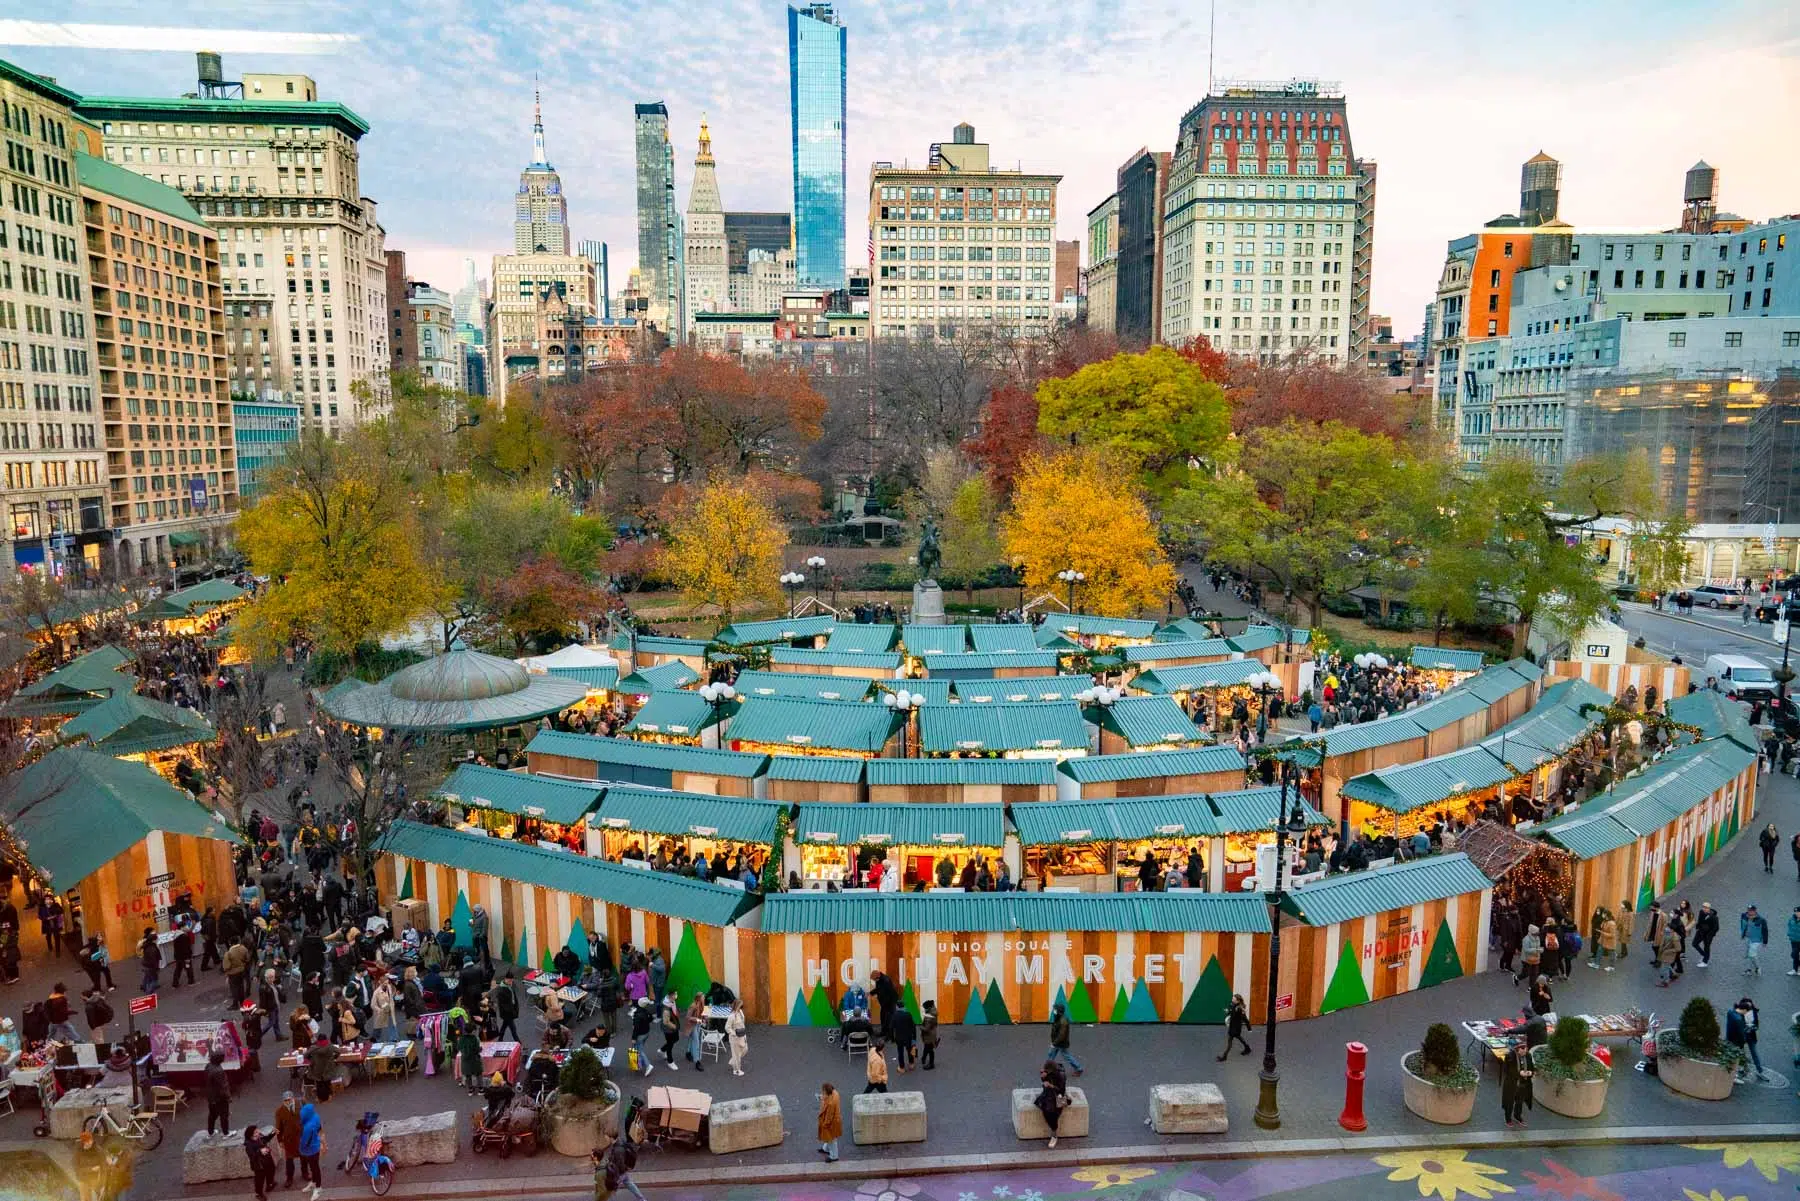 Visiting New York City Christmas
Union Square Greenmarket, things to do in NYC in fall